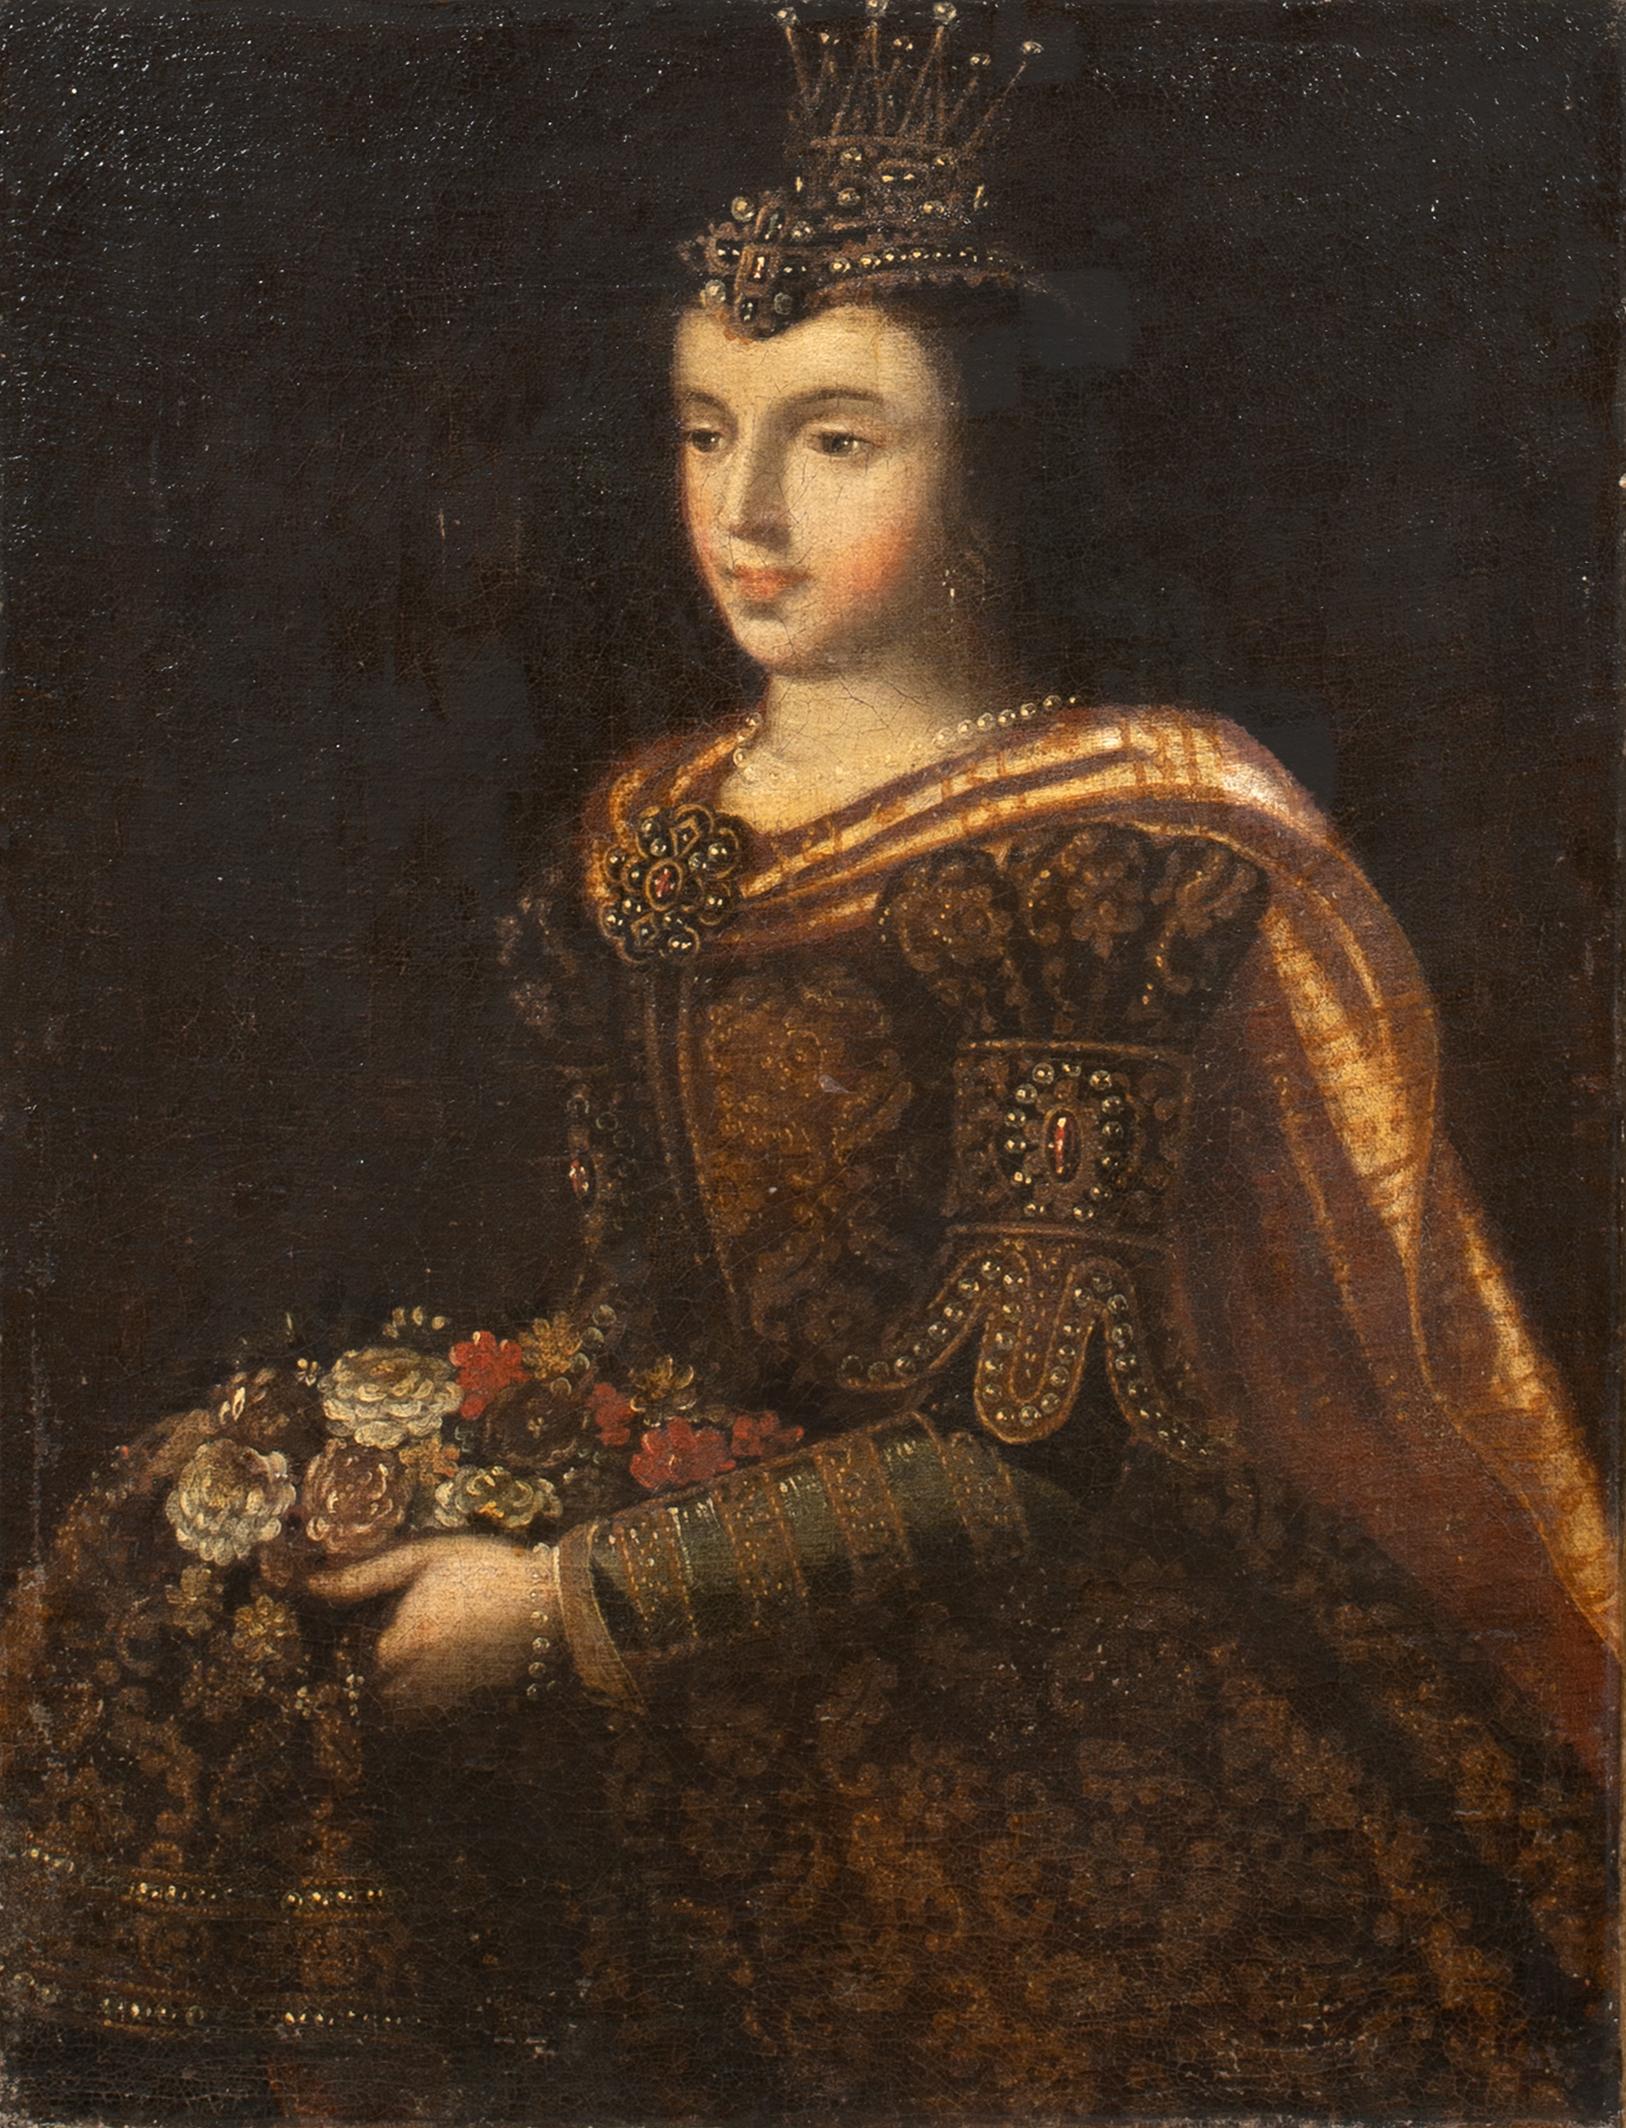 Saint Dorothy, 16th Century - Black Portrait Painting by Unknown